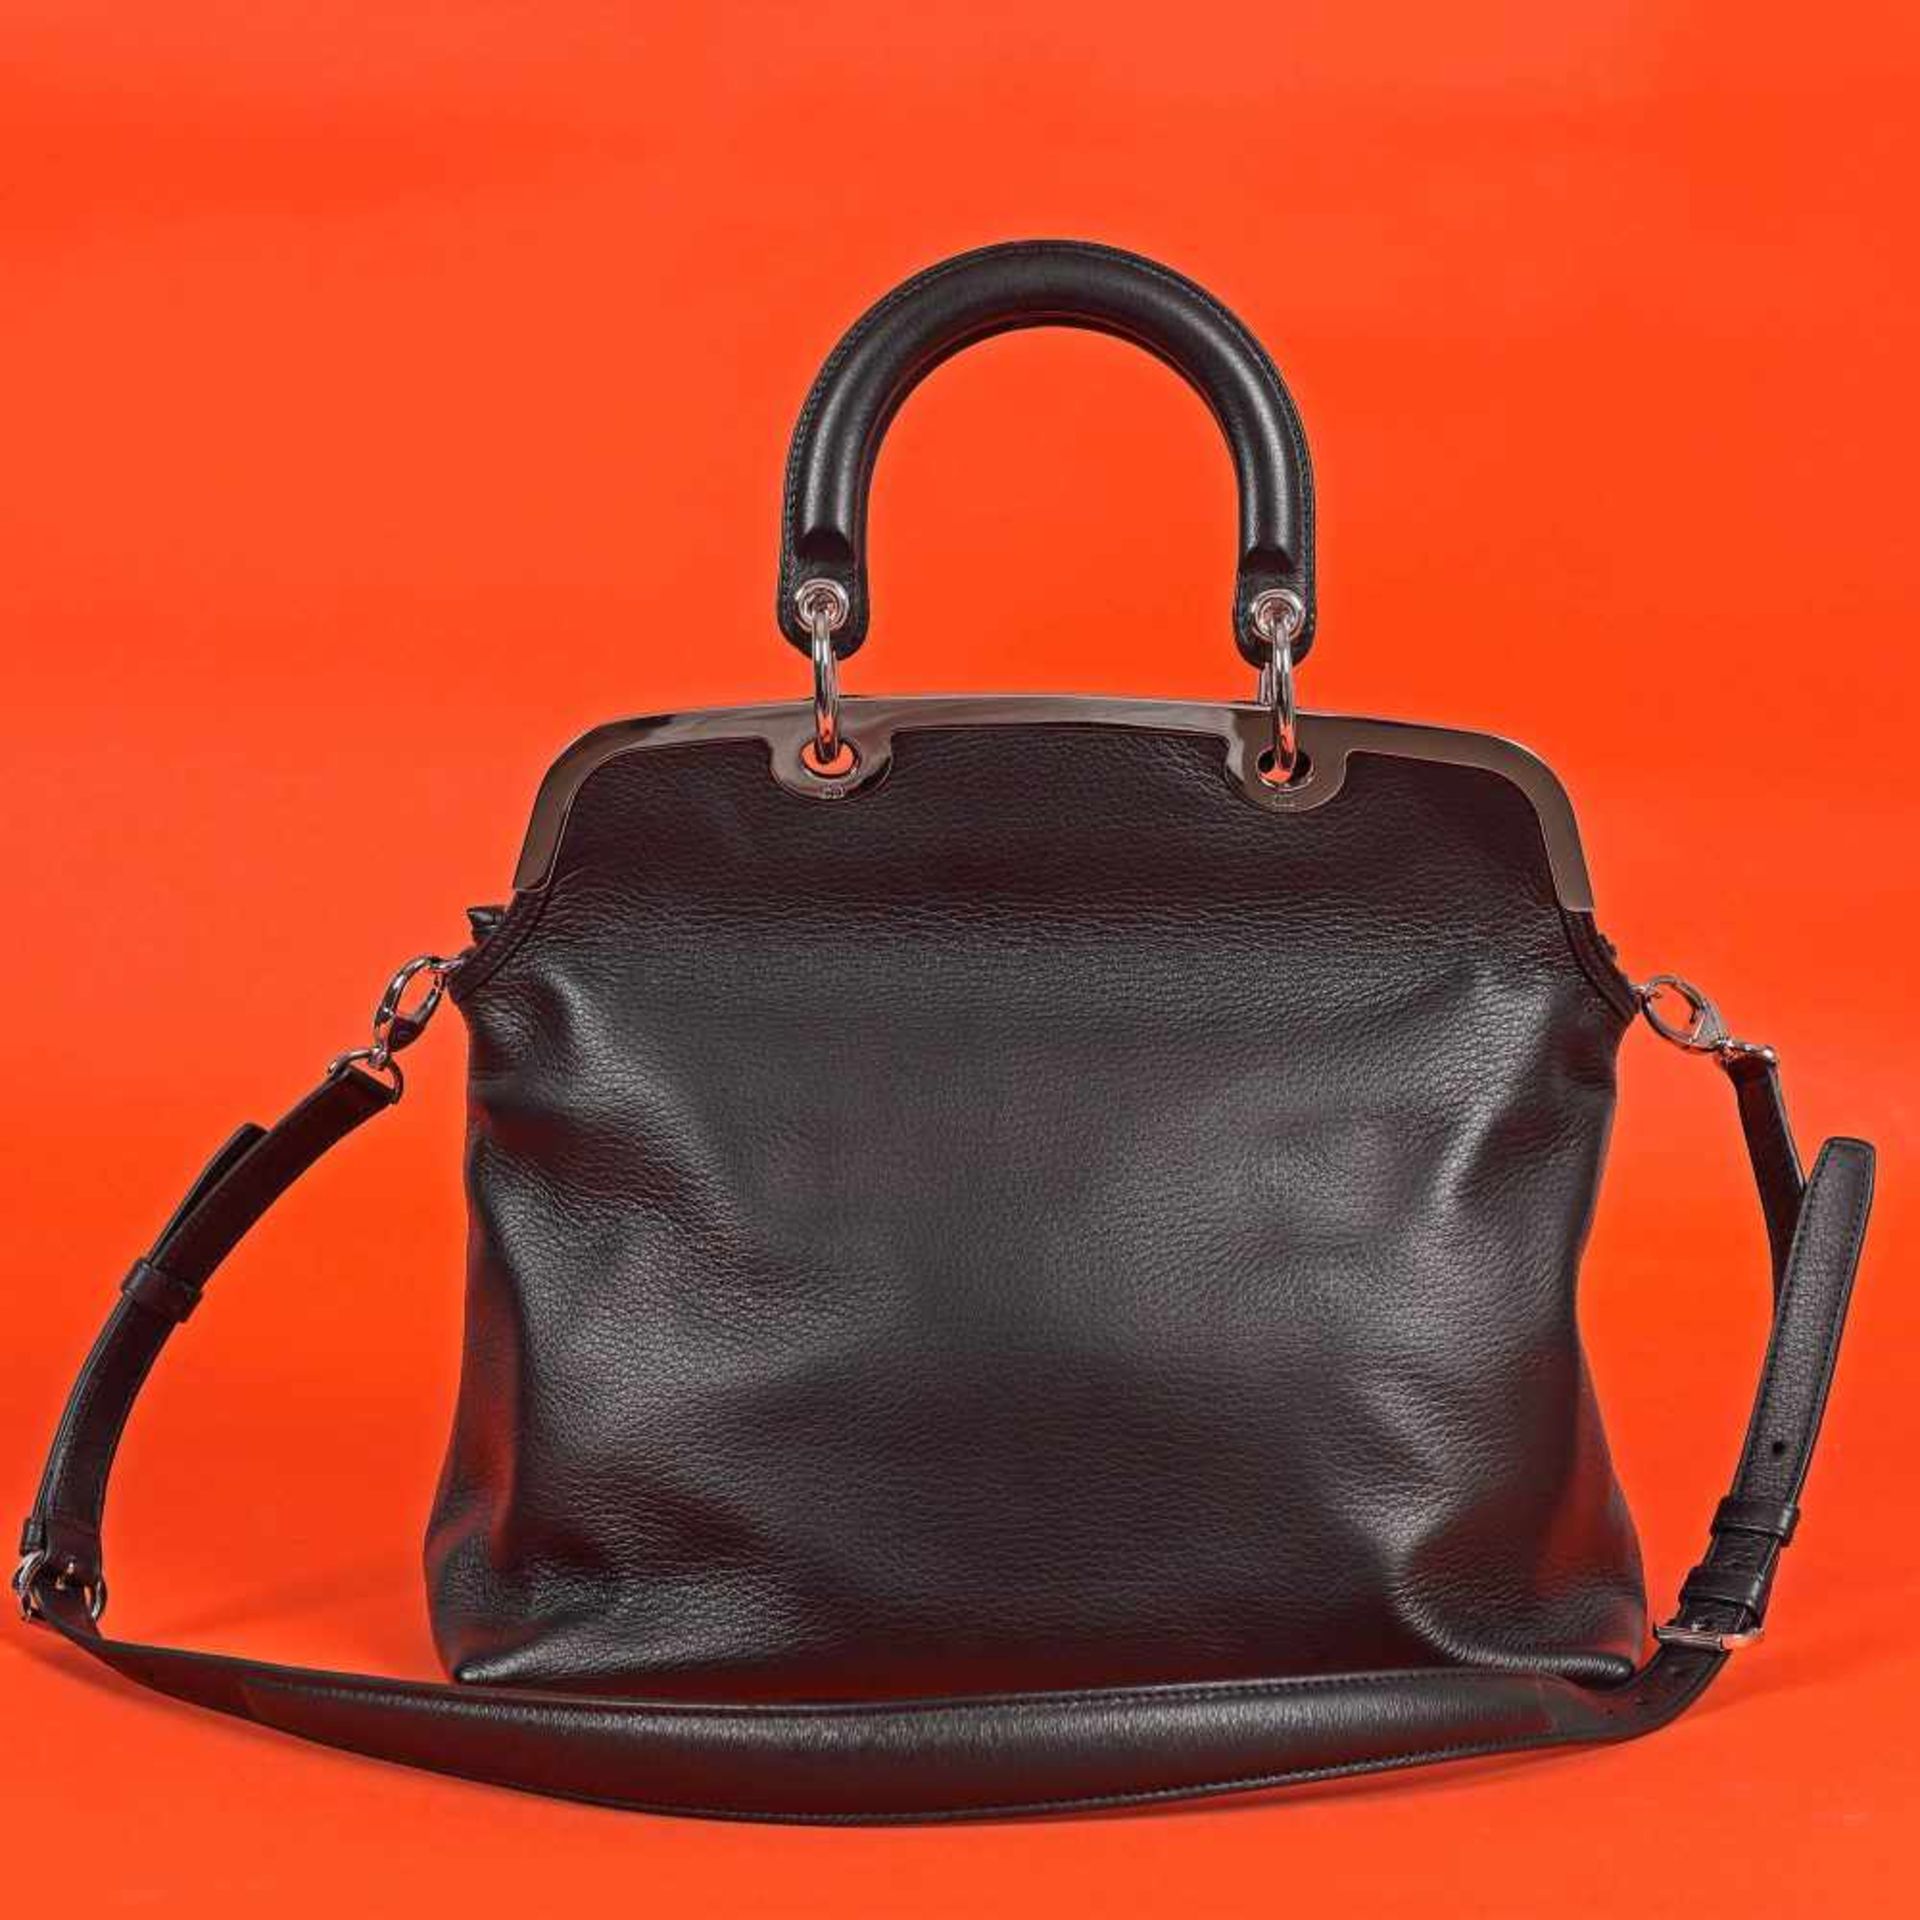 "Granville" - Dior bag, leather, for women - Image 5 of 8